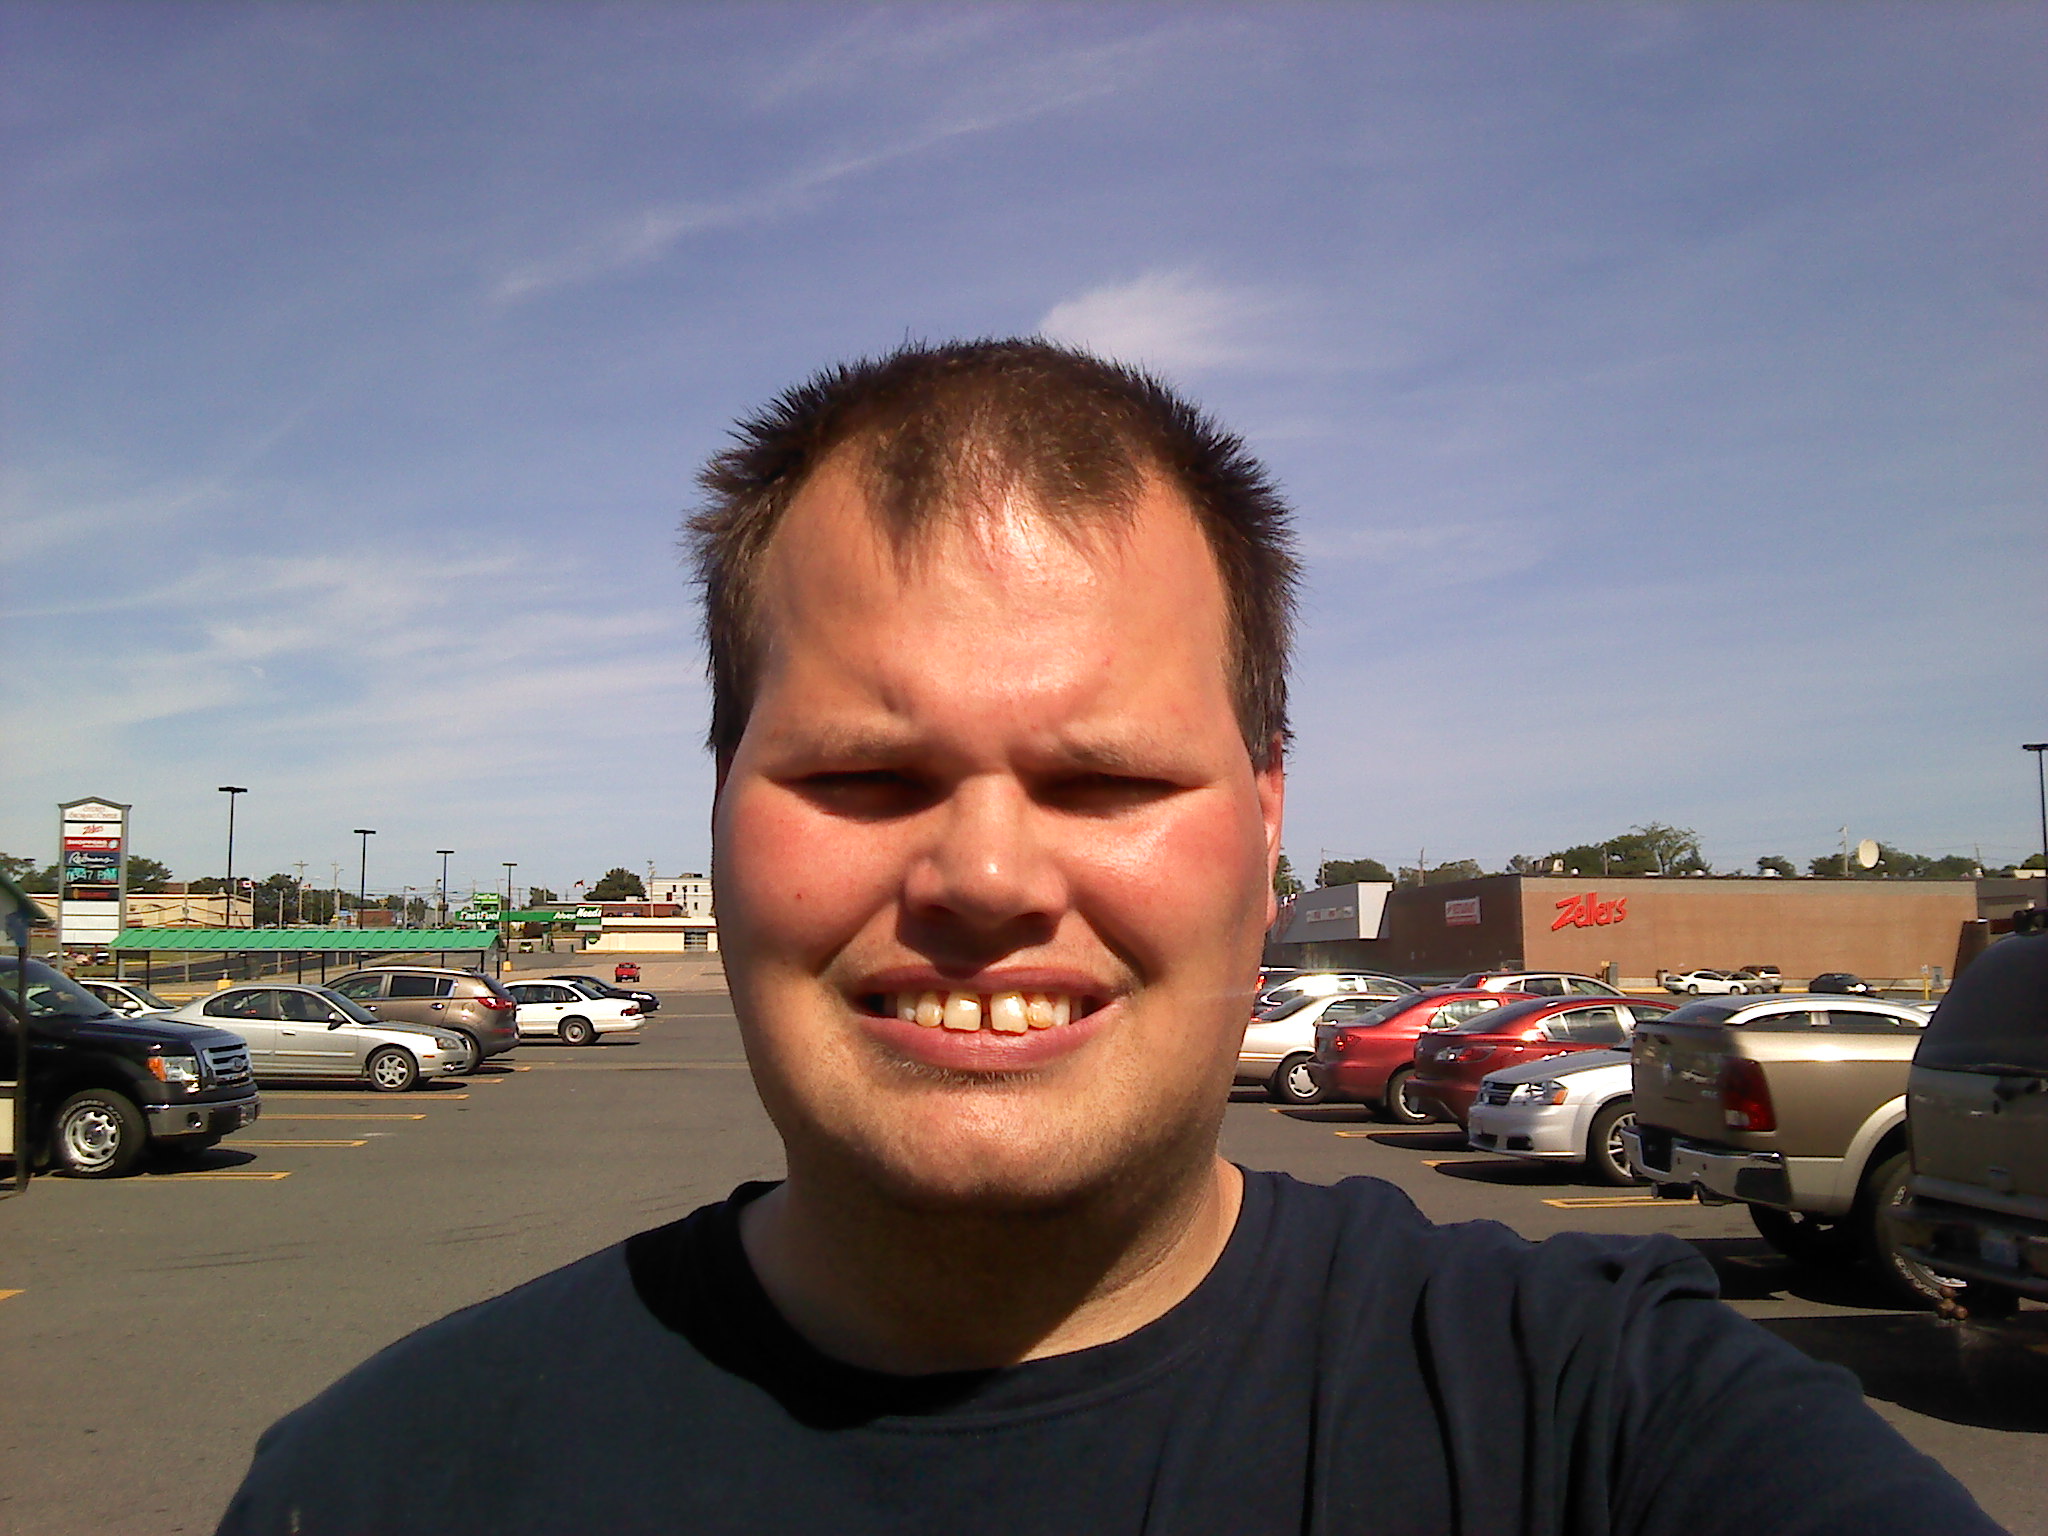 Frankie MacDonald enjoying his walk during the hot weather today and Hot and Humid outside in Sydney Nova Scotia today.